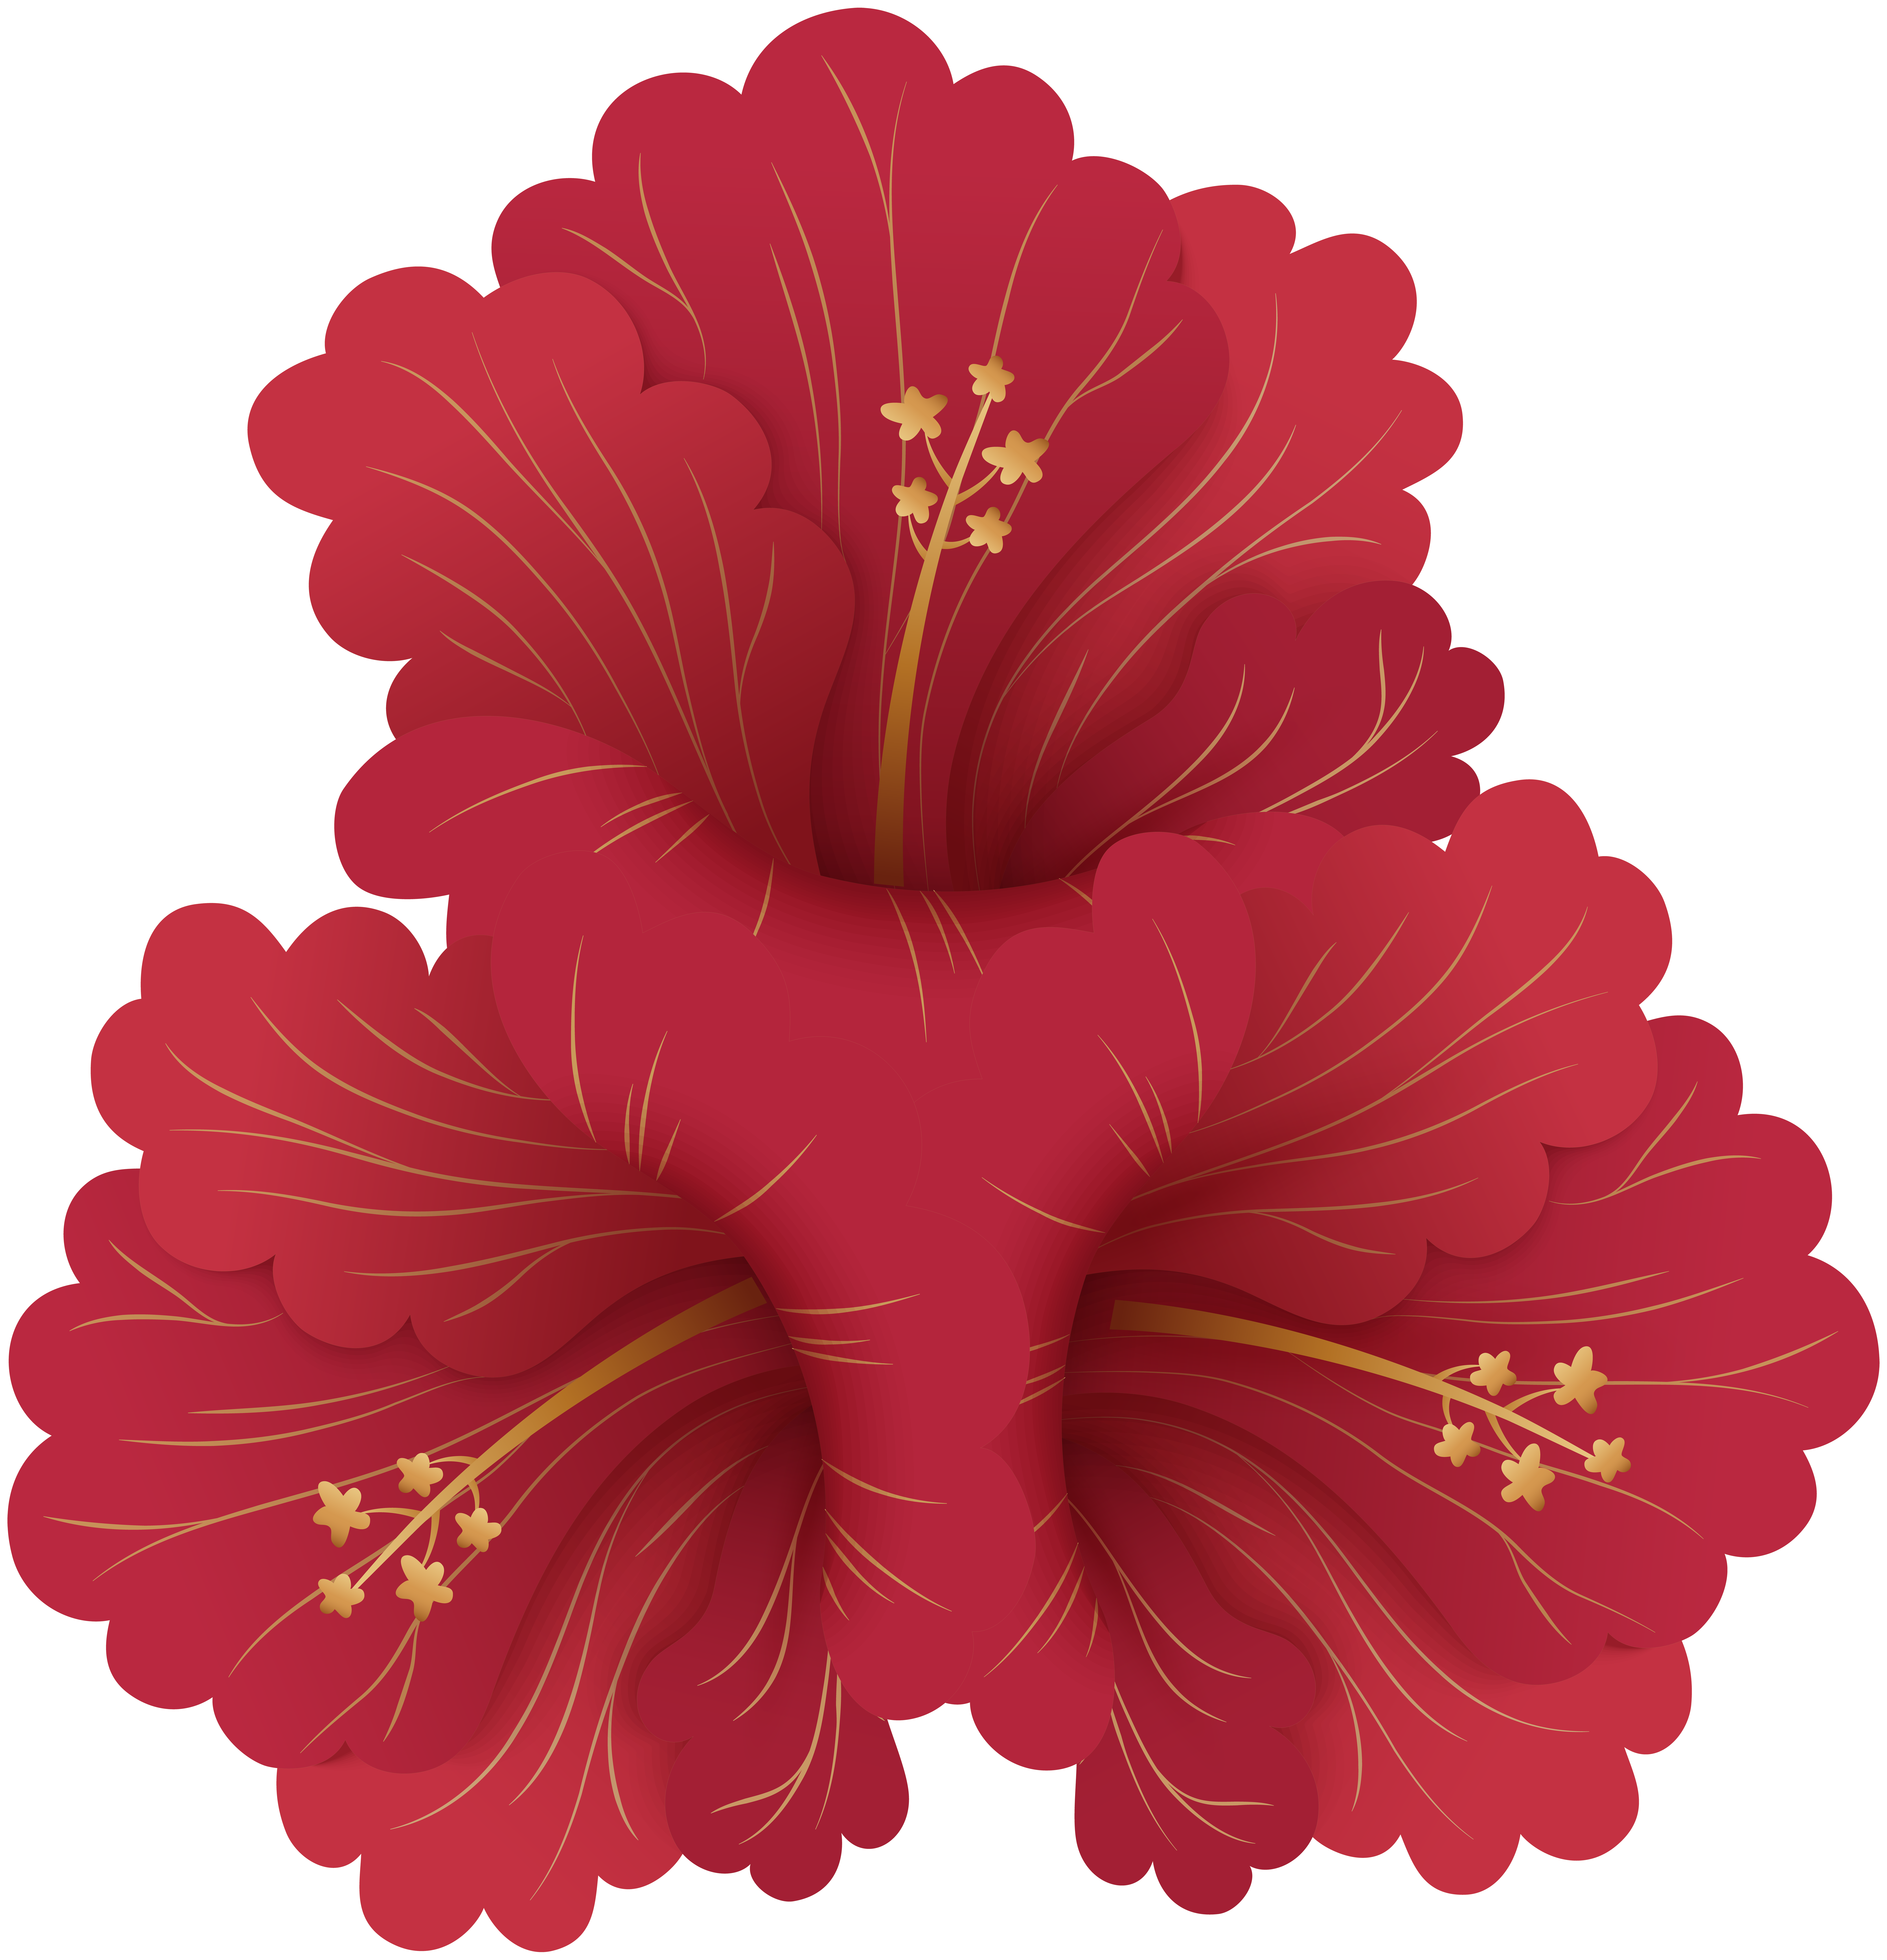 Red Flowers PNG Clip Art Image | Gallery Yopriceville - High ...